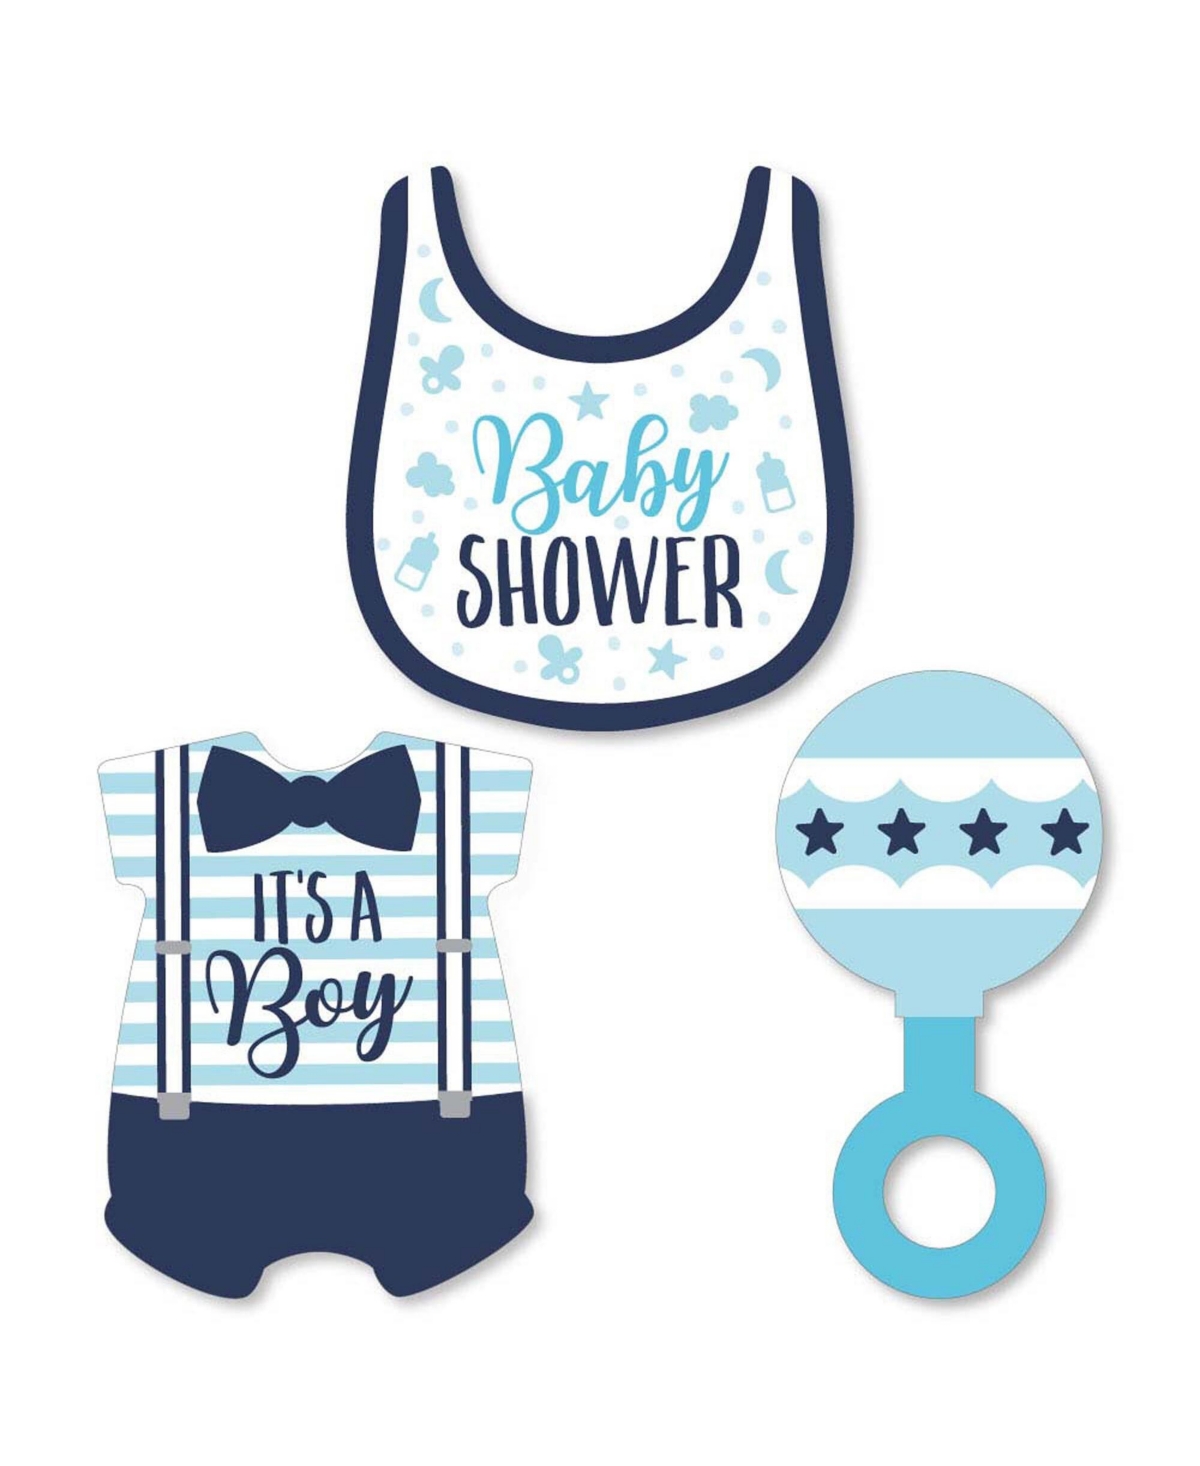 Its a Boy - Diy Shaped Blue Baby Shower Cut-Outs - 24 Ct